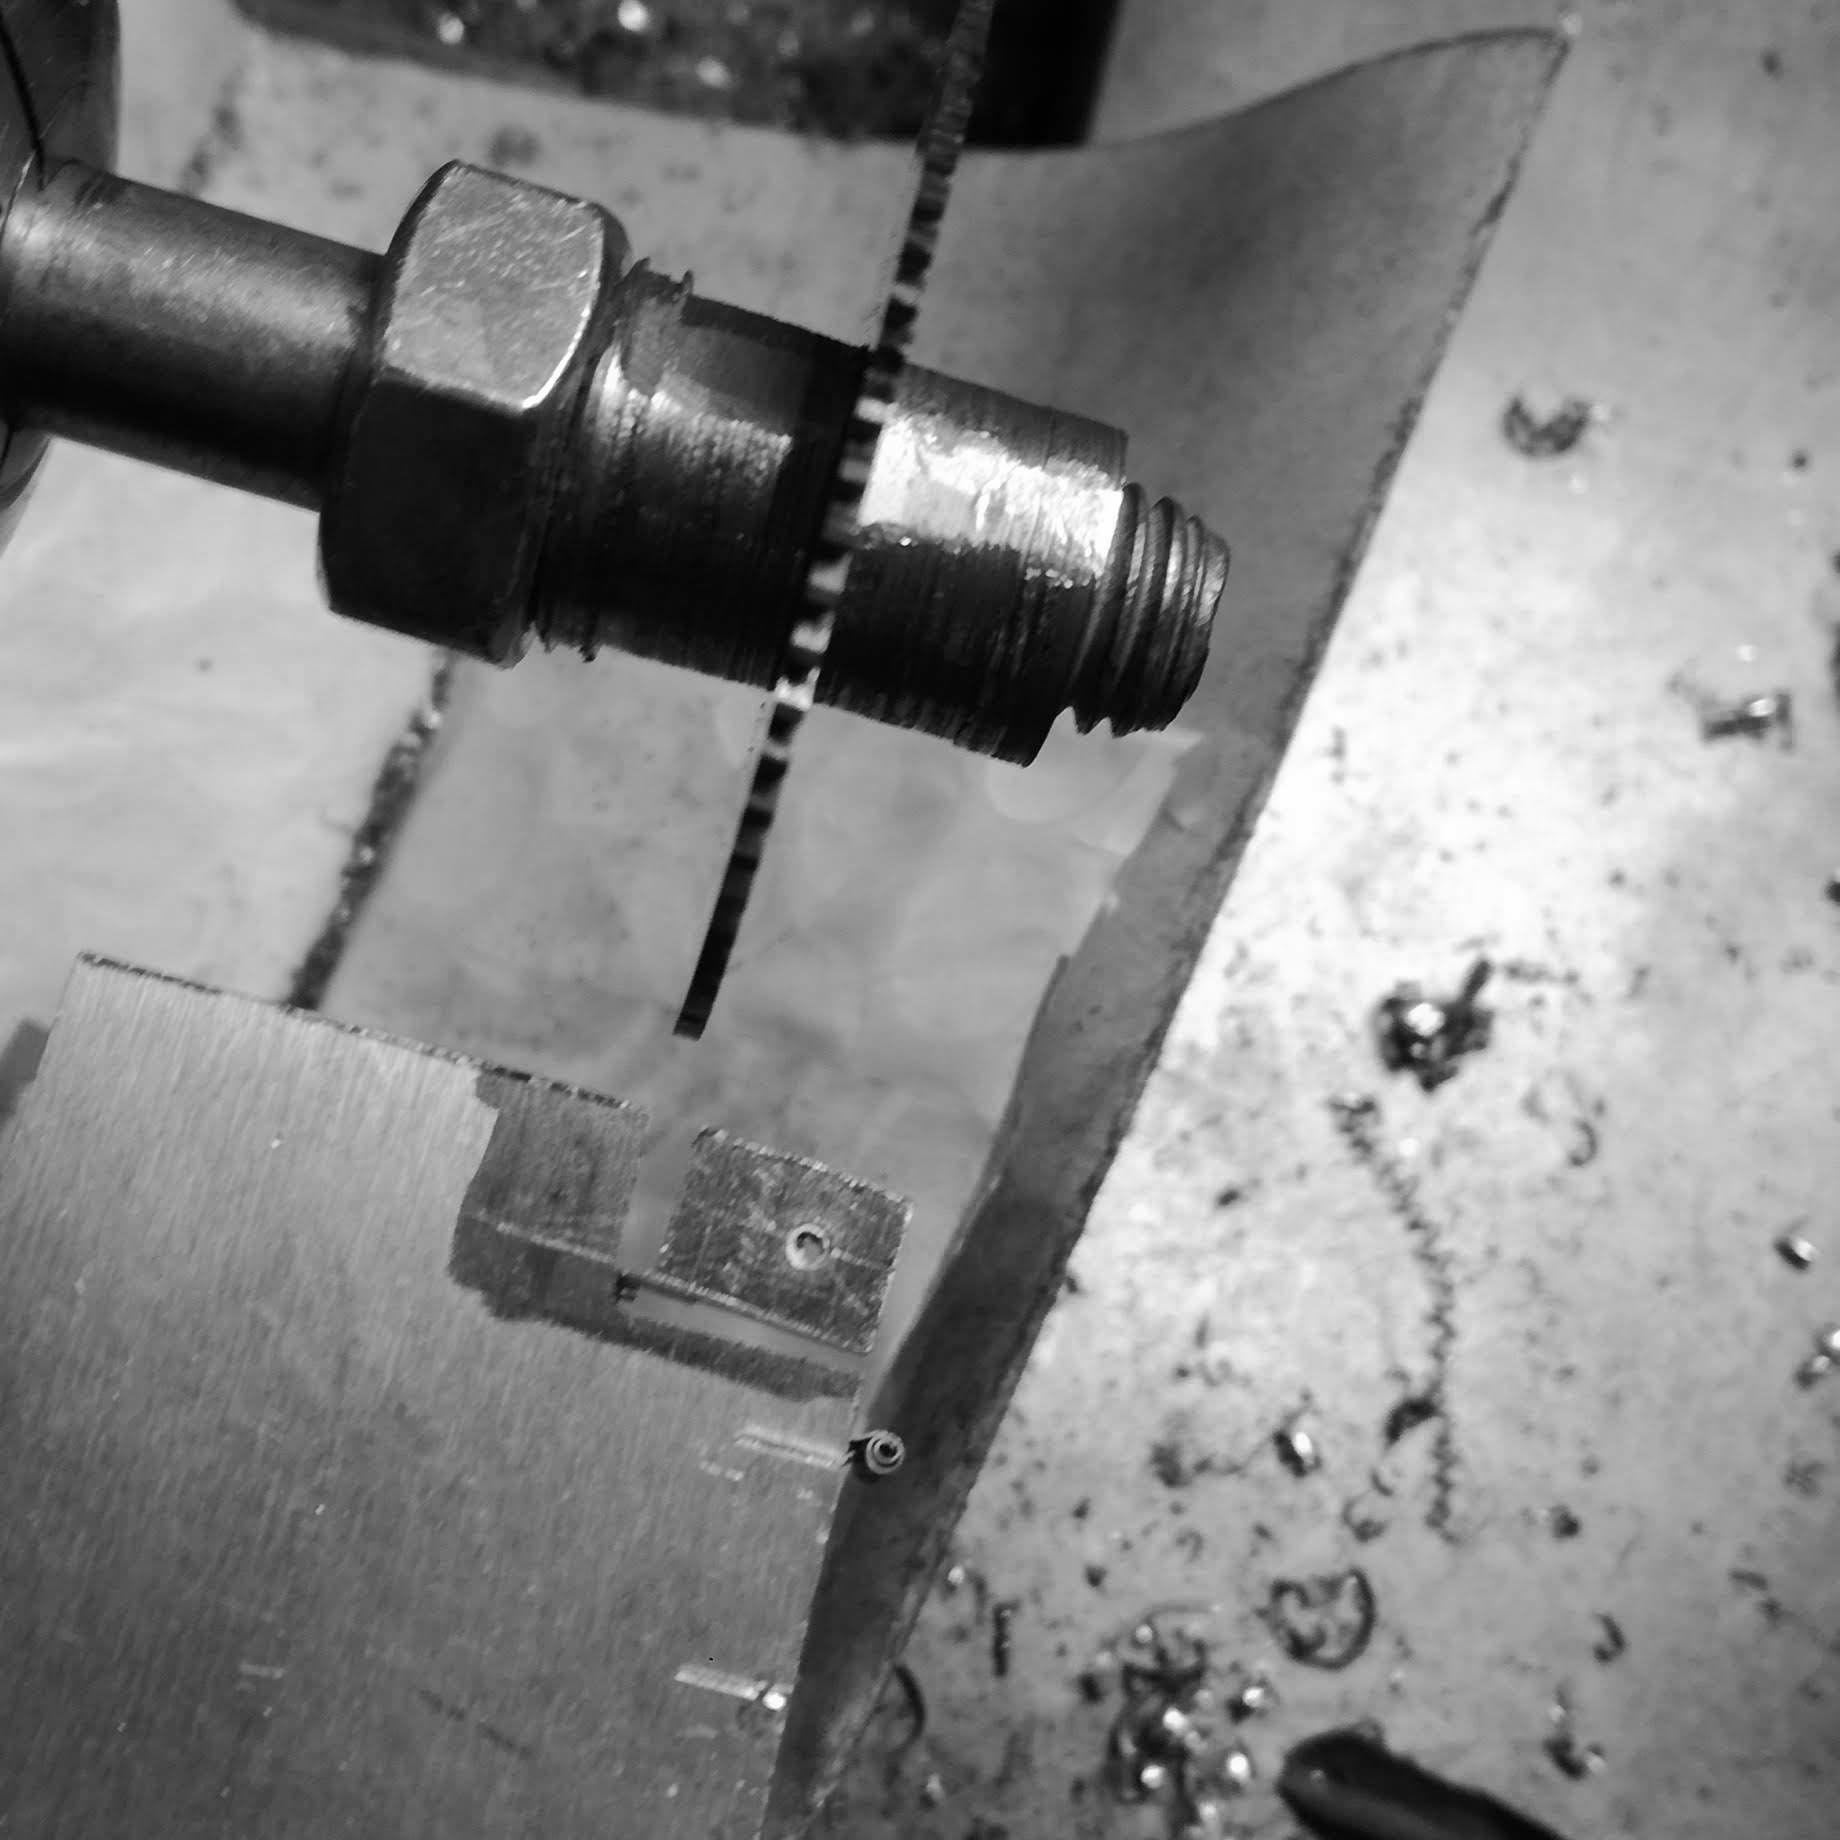 Cutting the part off with the slitting saw on the lathe.